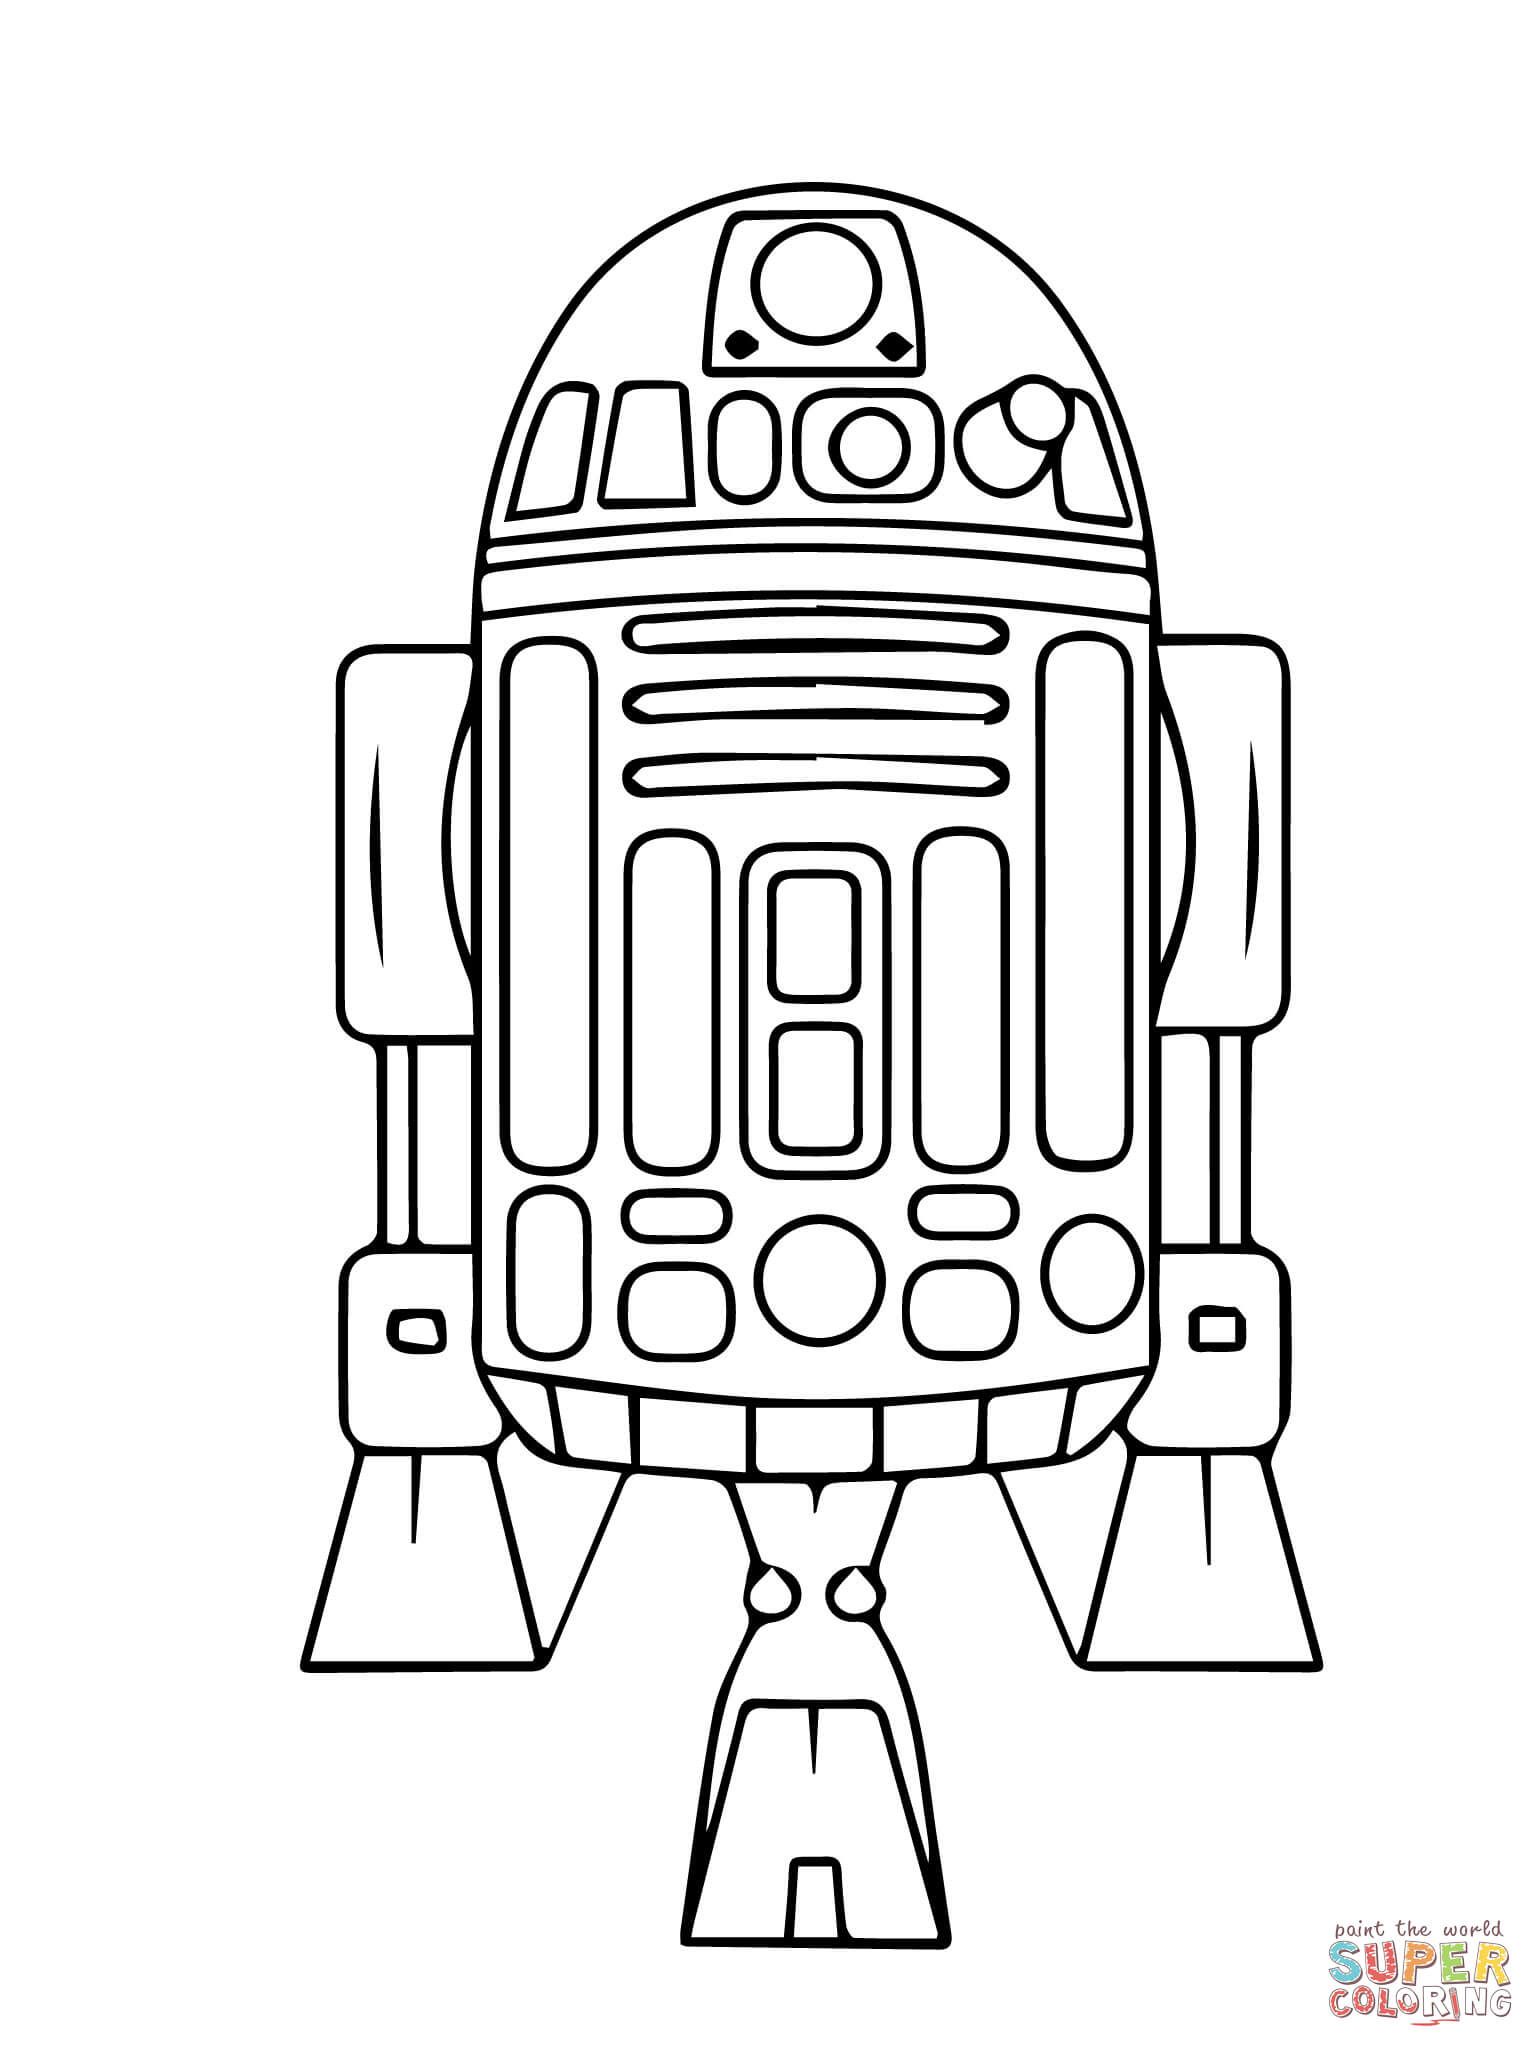 lego-star-wars-coloring-pages-r2d2-part-1